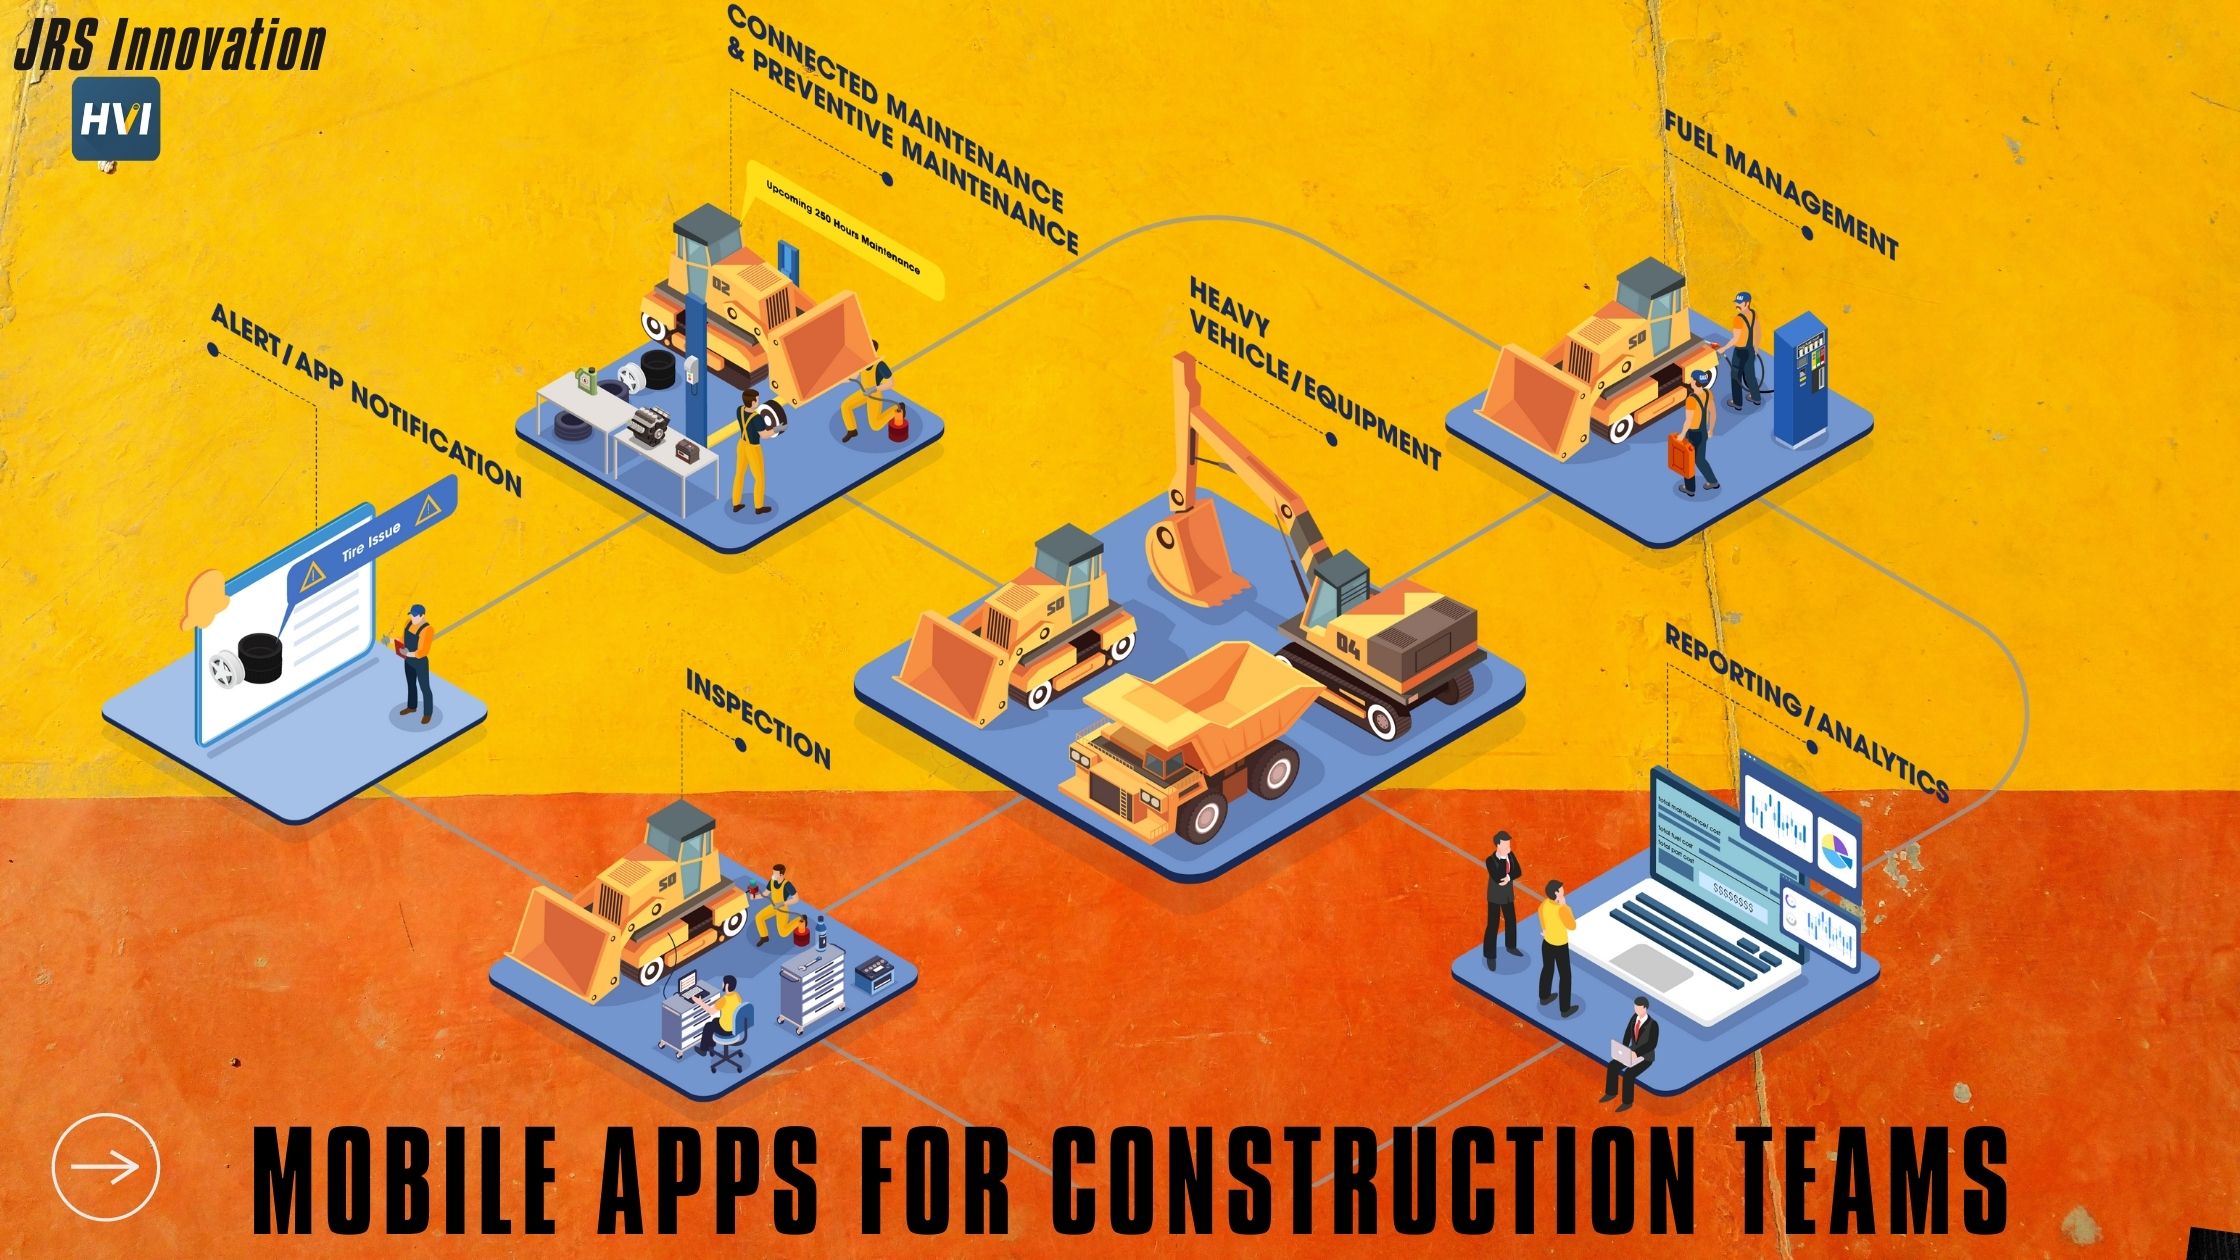 HVI is #1 app software for heavy machinery, construction equipment management. Our technology is built in the cloud and relies on mobile phones to collect the breakdown report, DVIR and fuel log information compared to expensive hardware requiring time consuming installations. JRS Innovation LLC, provides inspection, maintenance, fuel management.